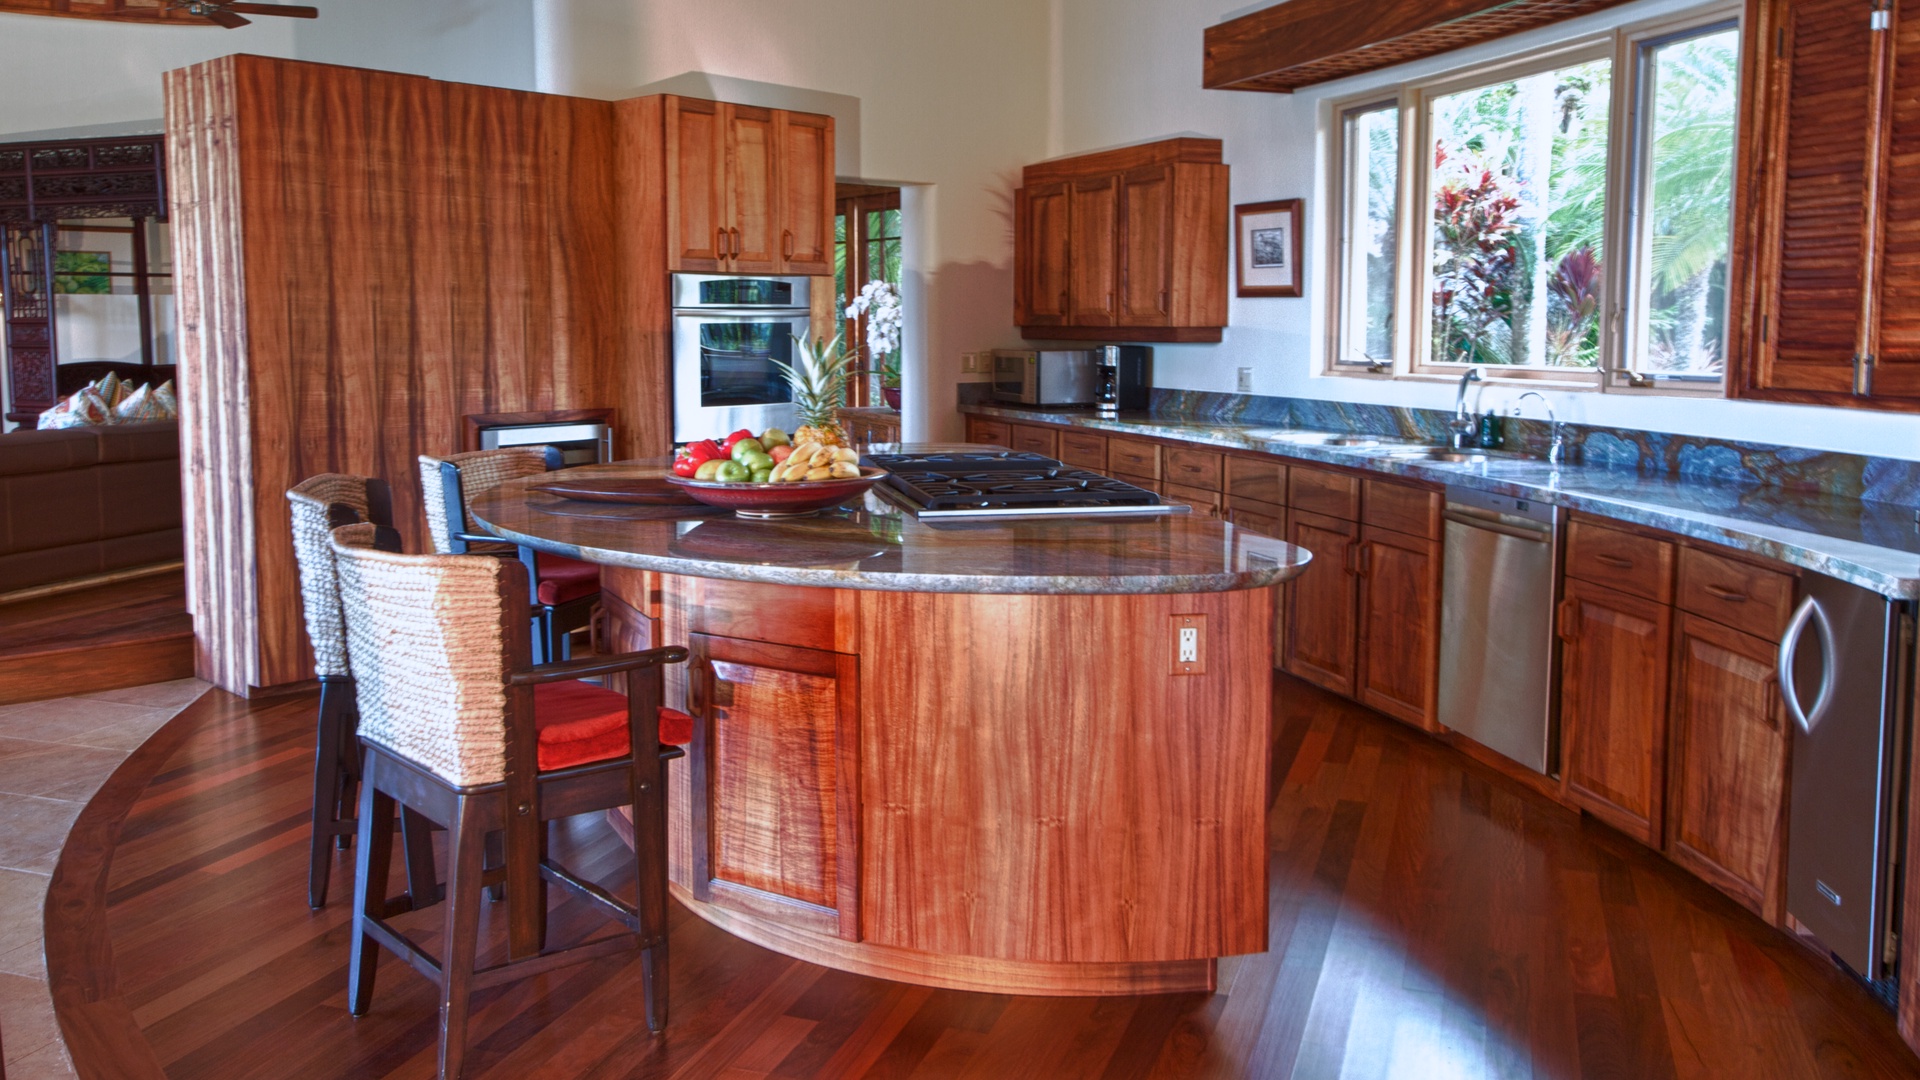 Kailua Vacation Rentals, Paul Mitchell Estate* - Kitchen in Main House featuring solid Koa wood cabinetry